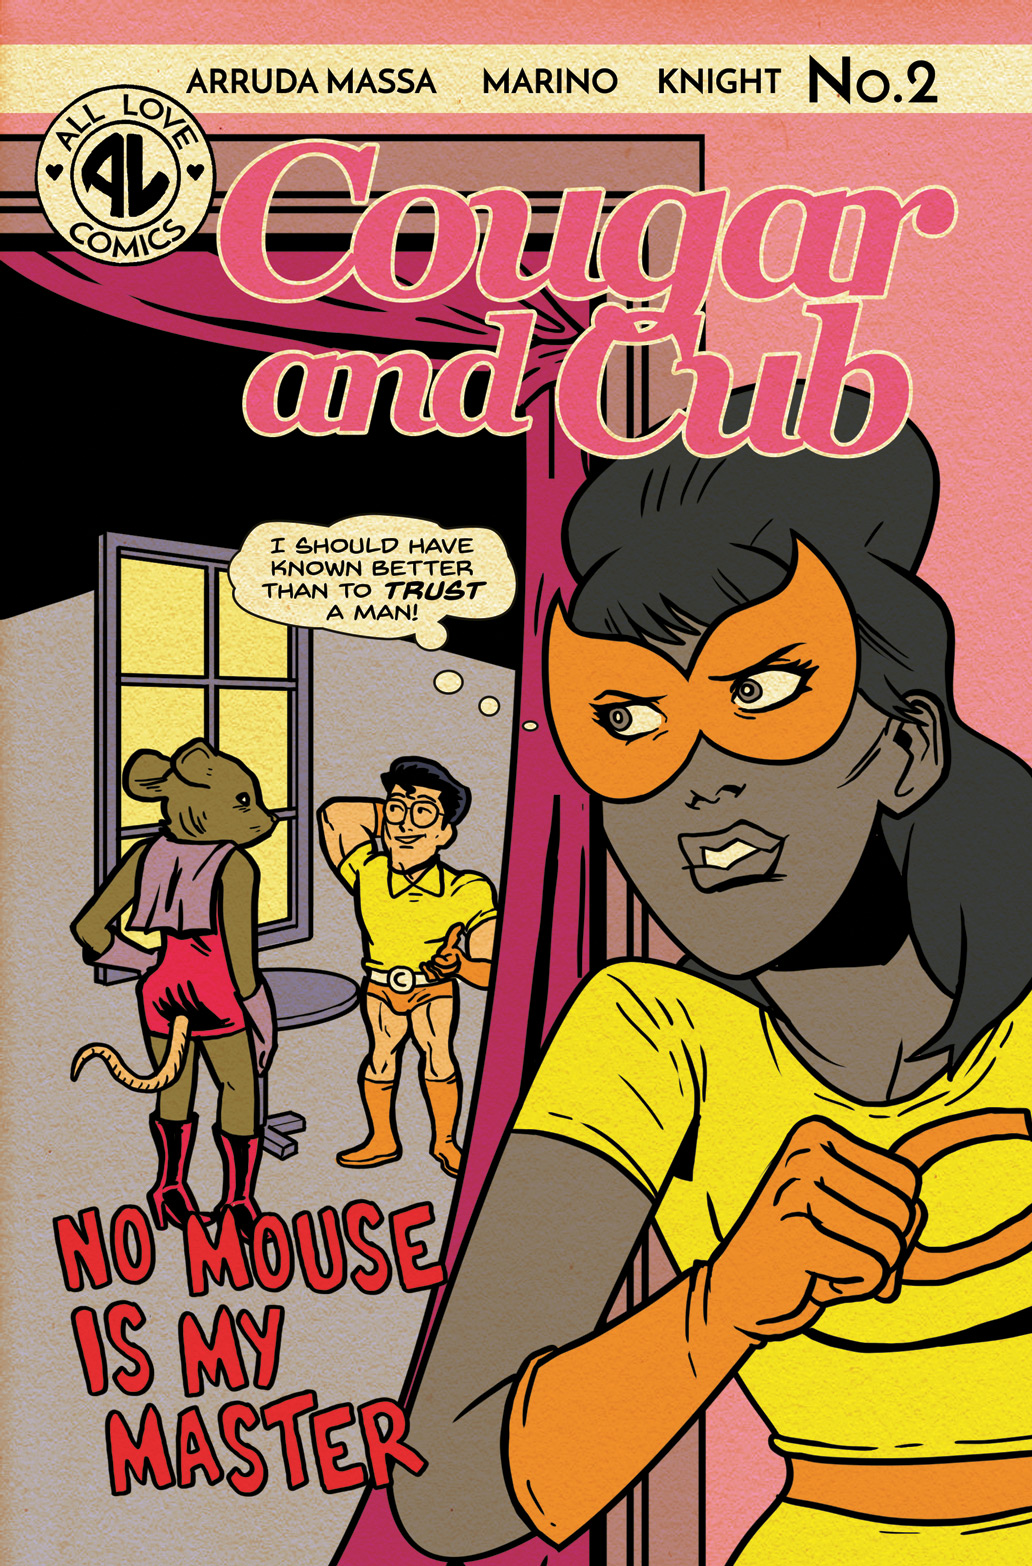 Cougar and Cub #2 flashback cover